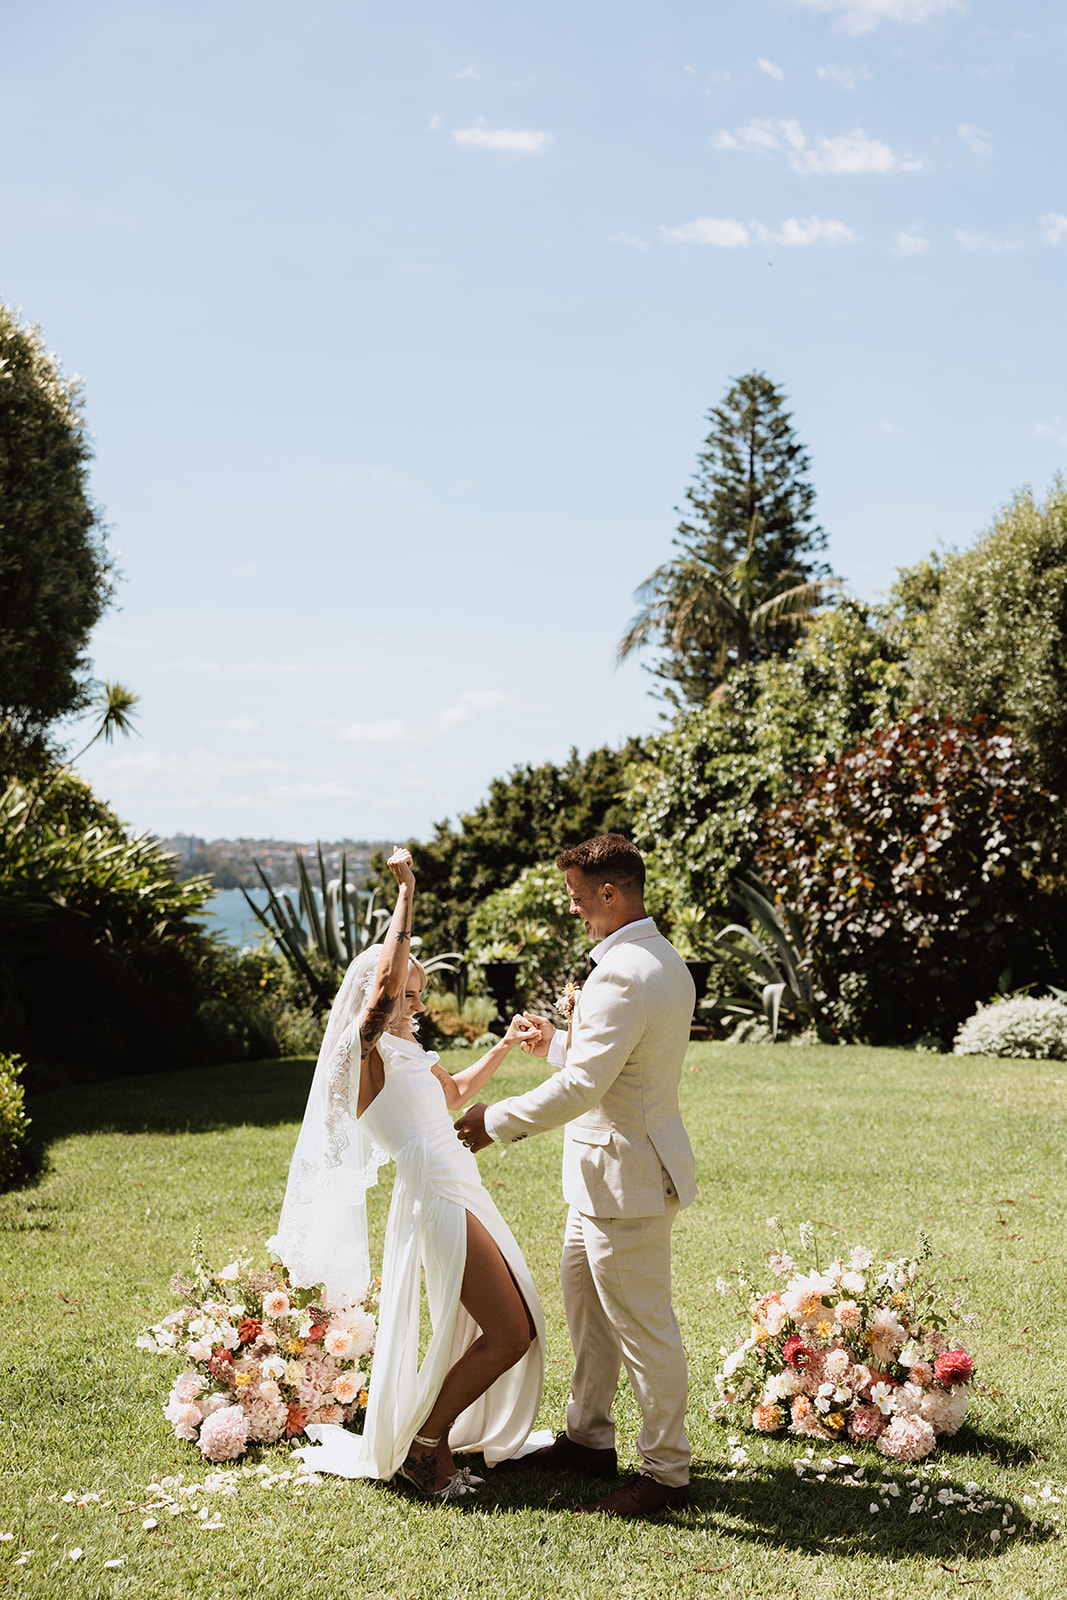 First kiss as a married couple at the Wedding in Lindesay House, Darling Point New South Wales